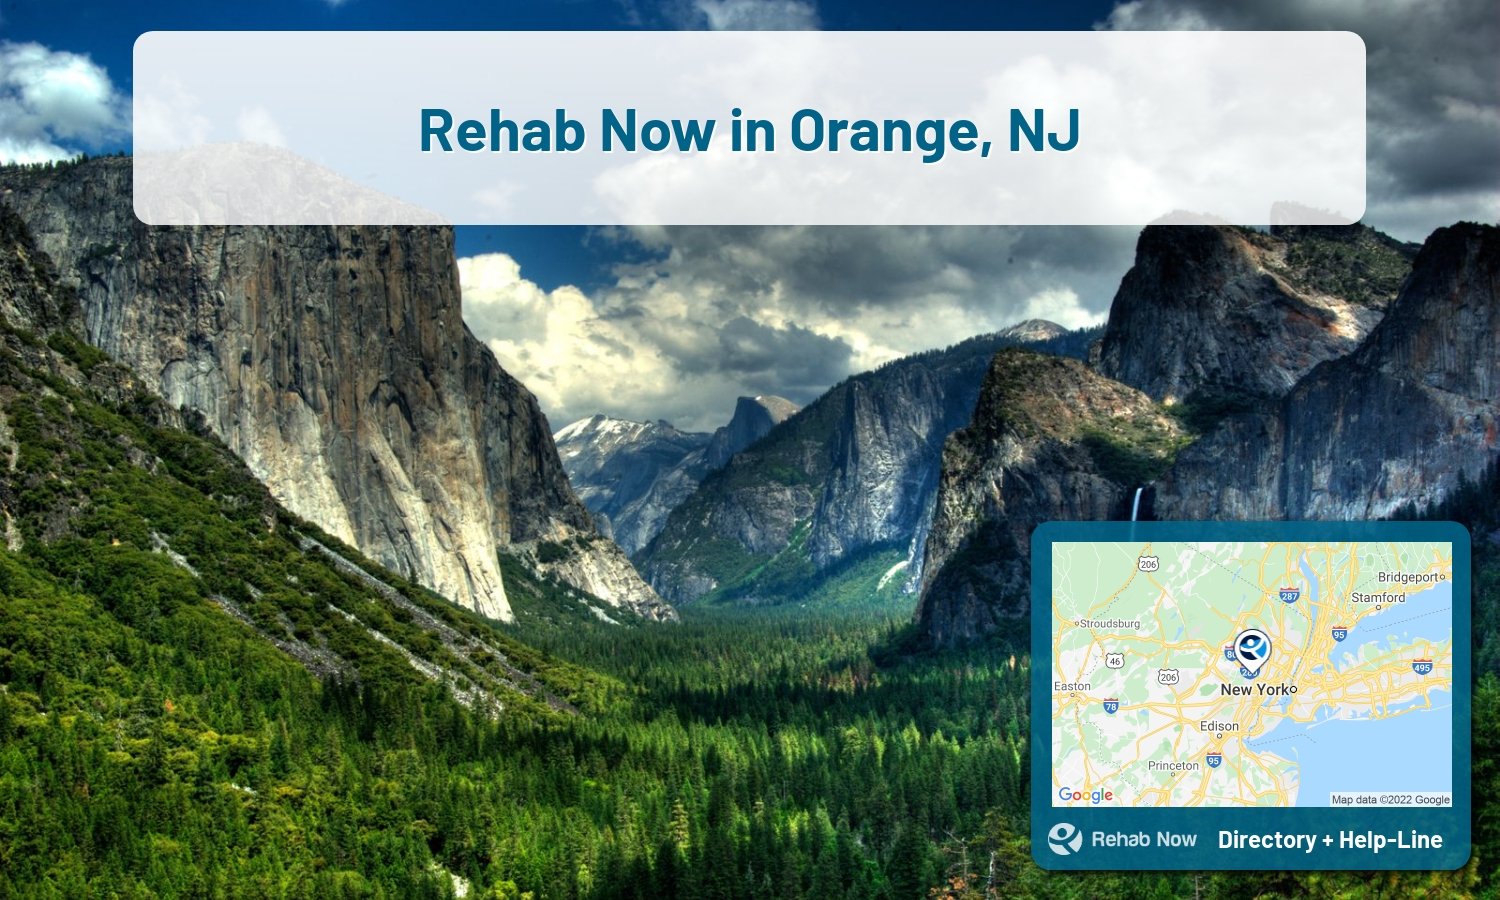 Orange, NJ Treatment Centers. Find drug rehab in Orange, New Jersey, or detox and treatment programs. Get the right help now!